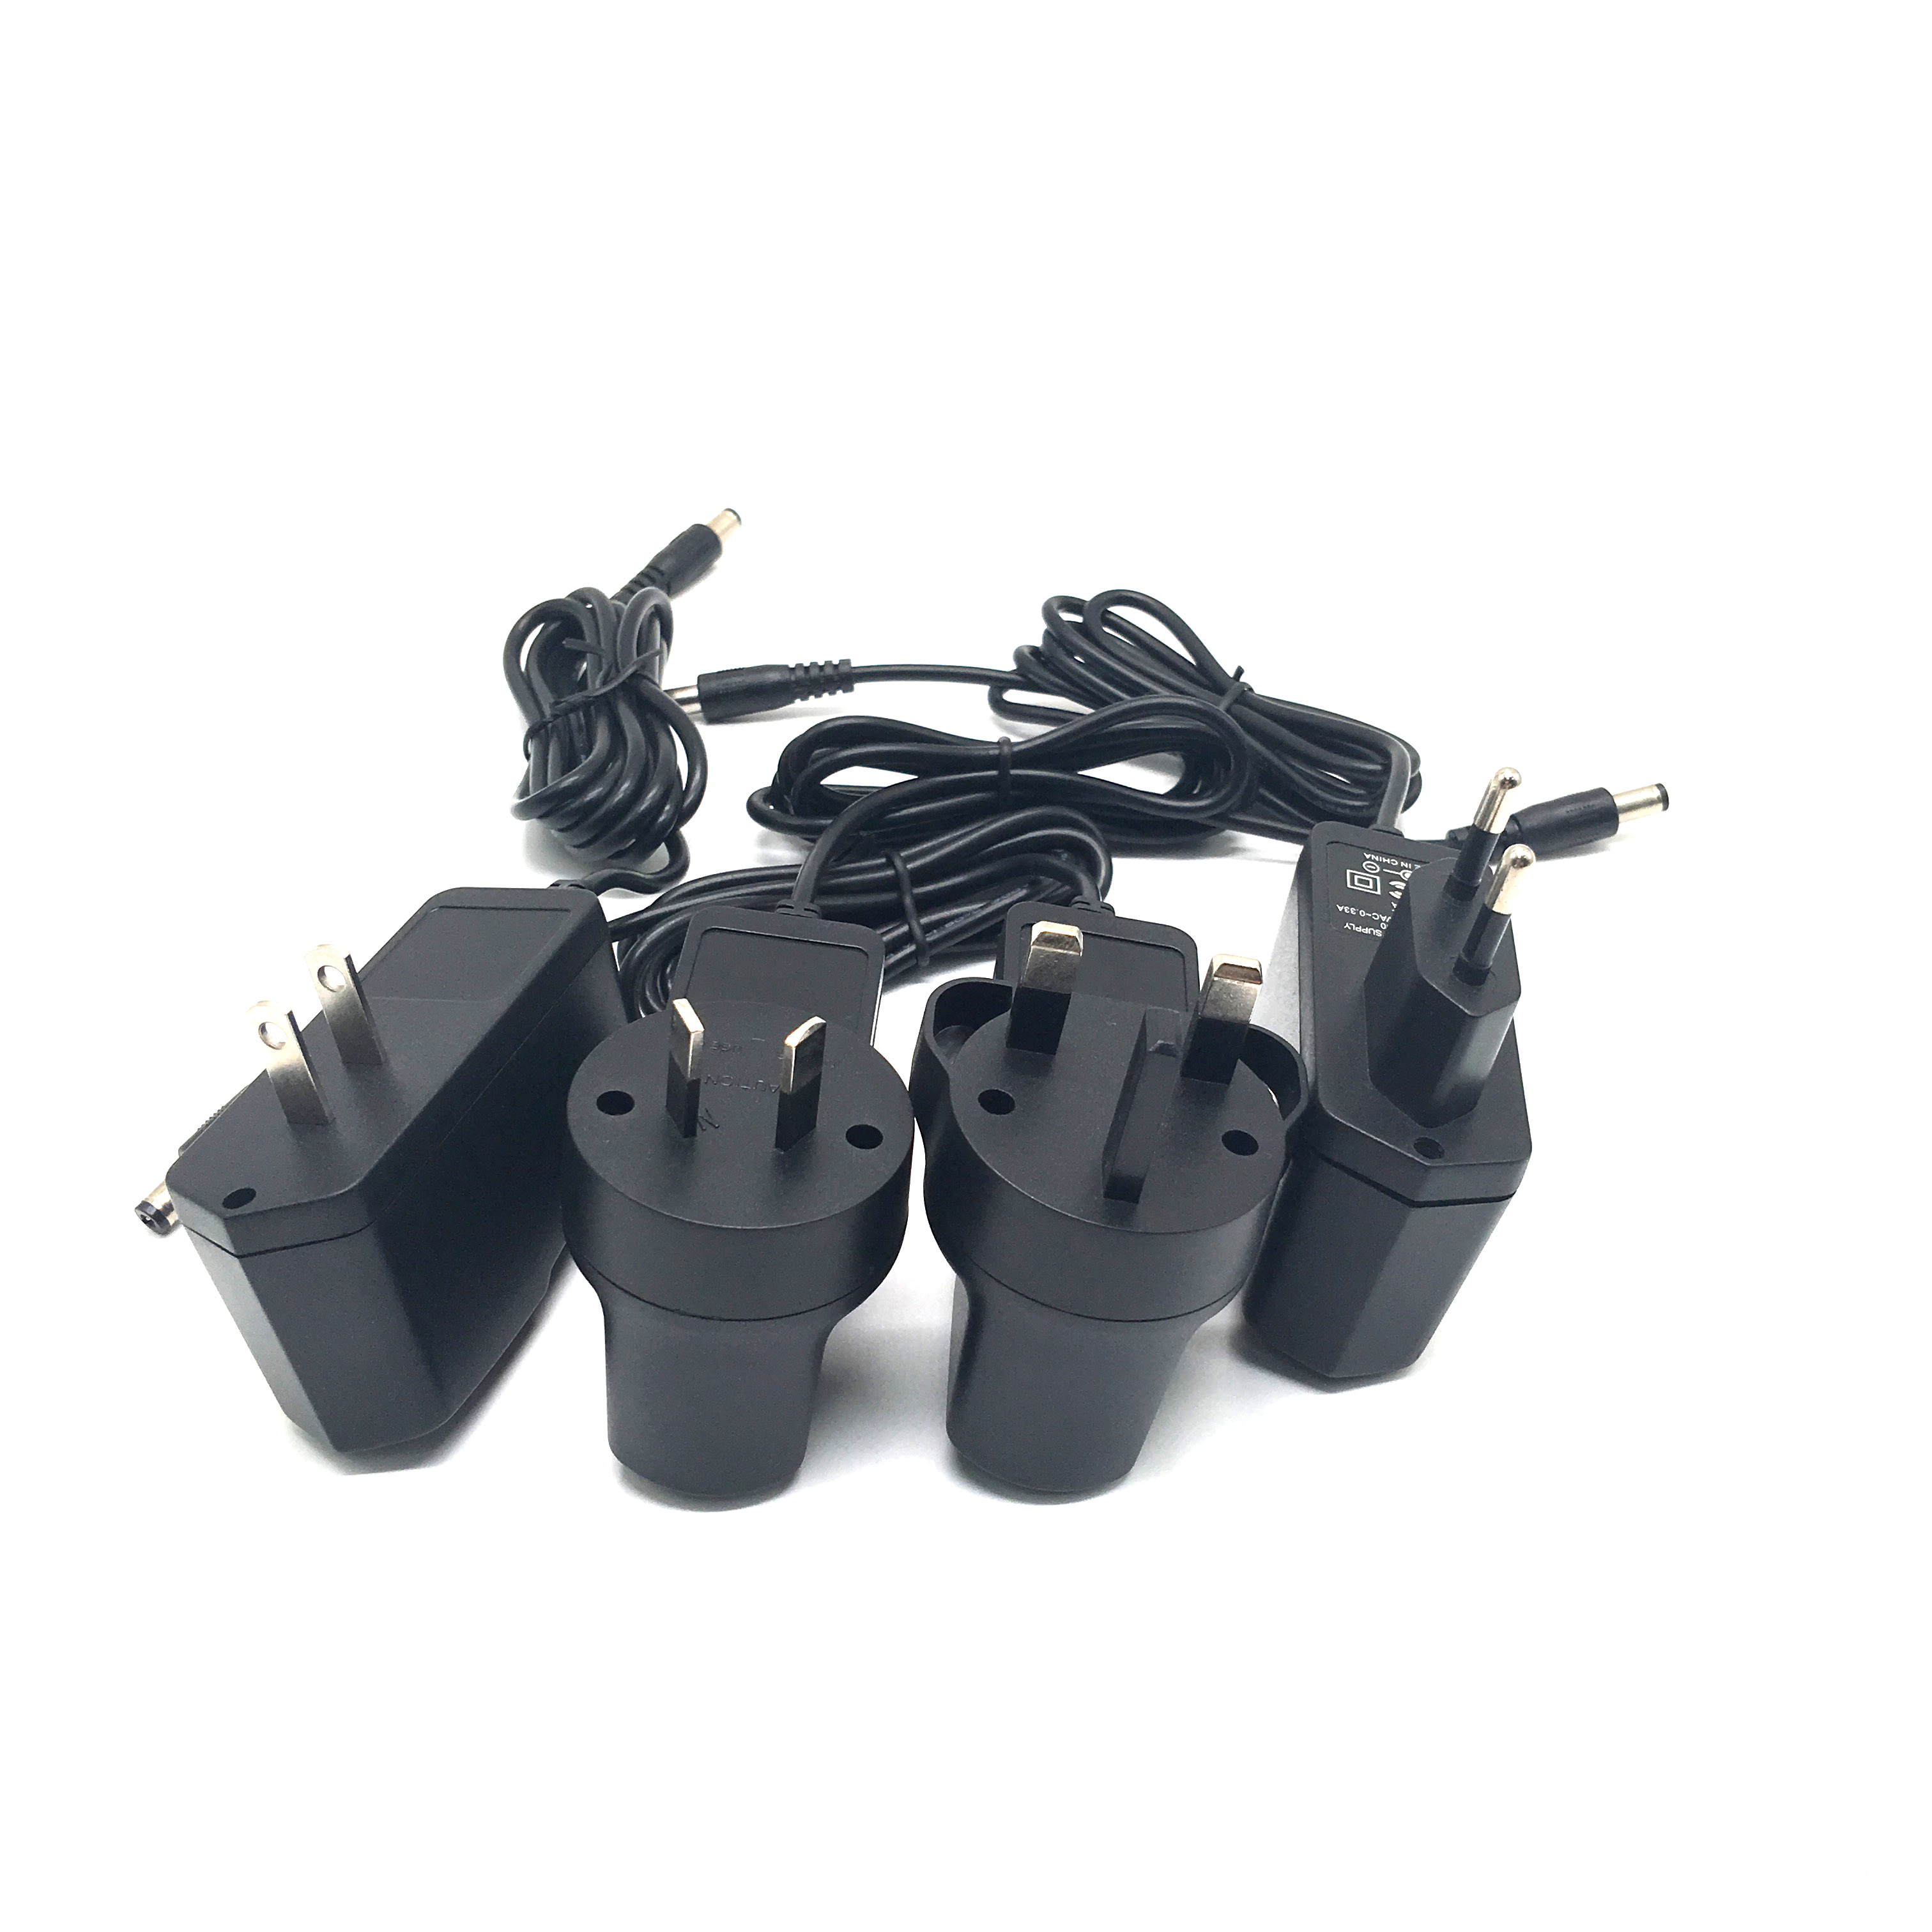 5V 1.5 A Power Adapter Featured Image